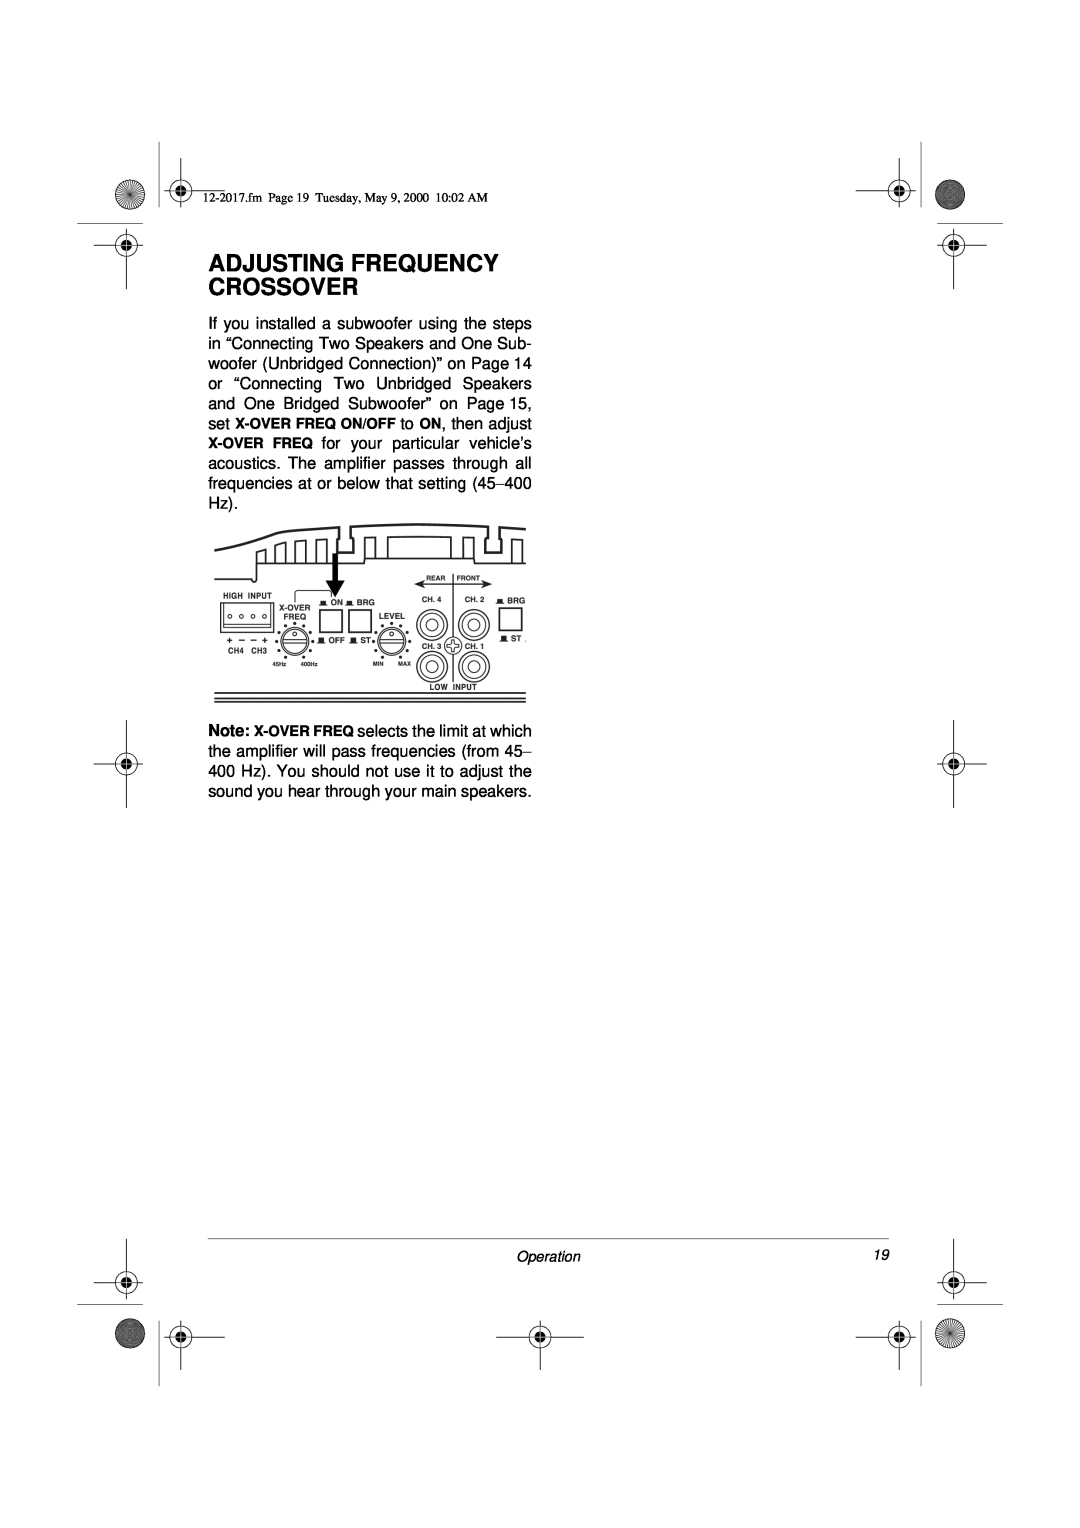 Radio Shack XL-260 owner manual Adjusting Frequency Crossover, Operation 